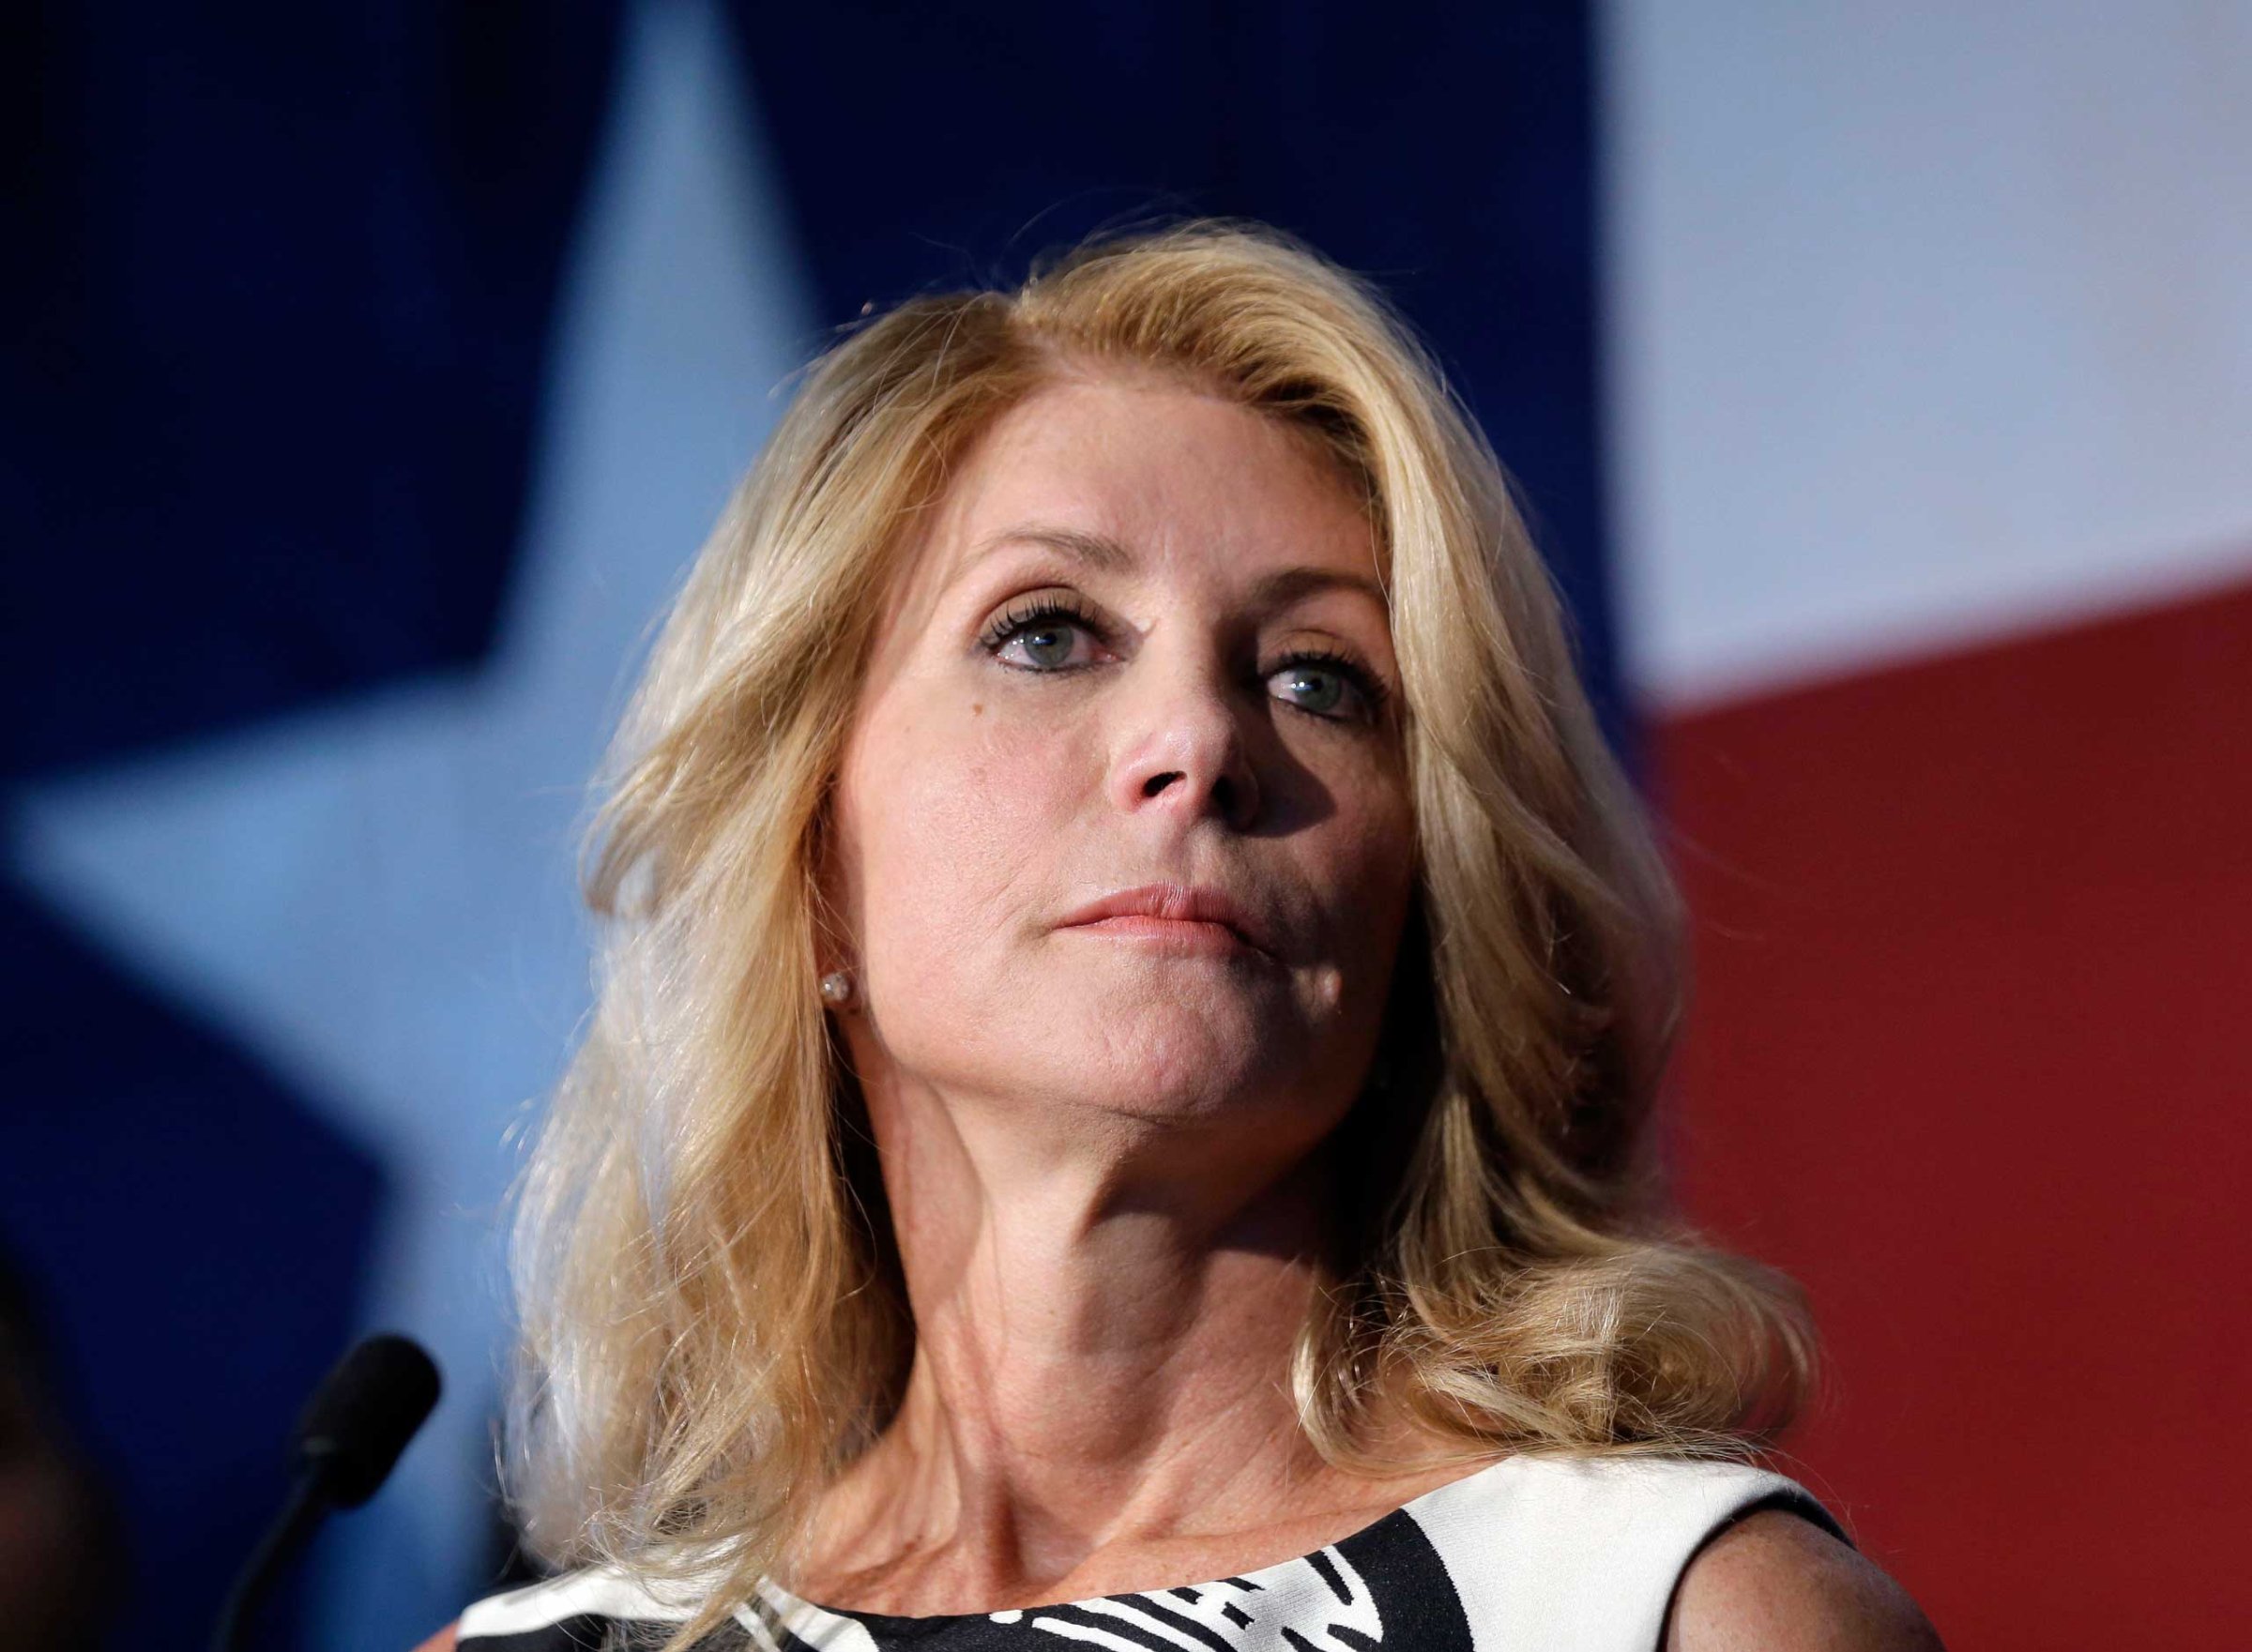 Texas Democratic gubernatorial candidate Wendy Davis presents her new education policy during a stop at Palo Alto College in San Antonio on Aug. 26, 2014.